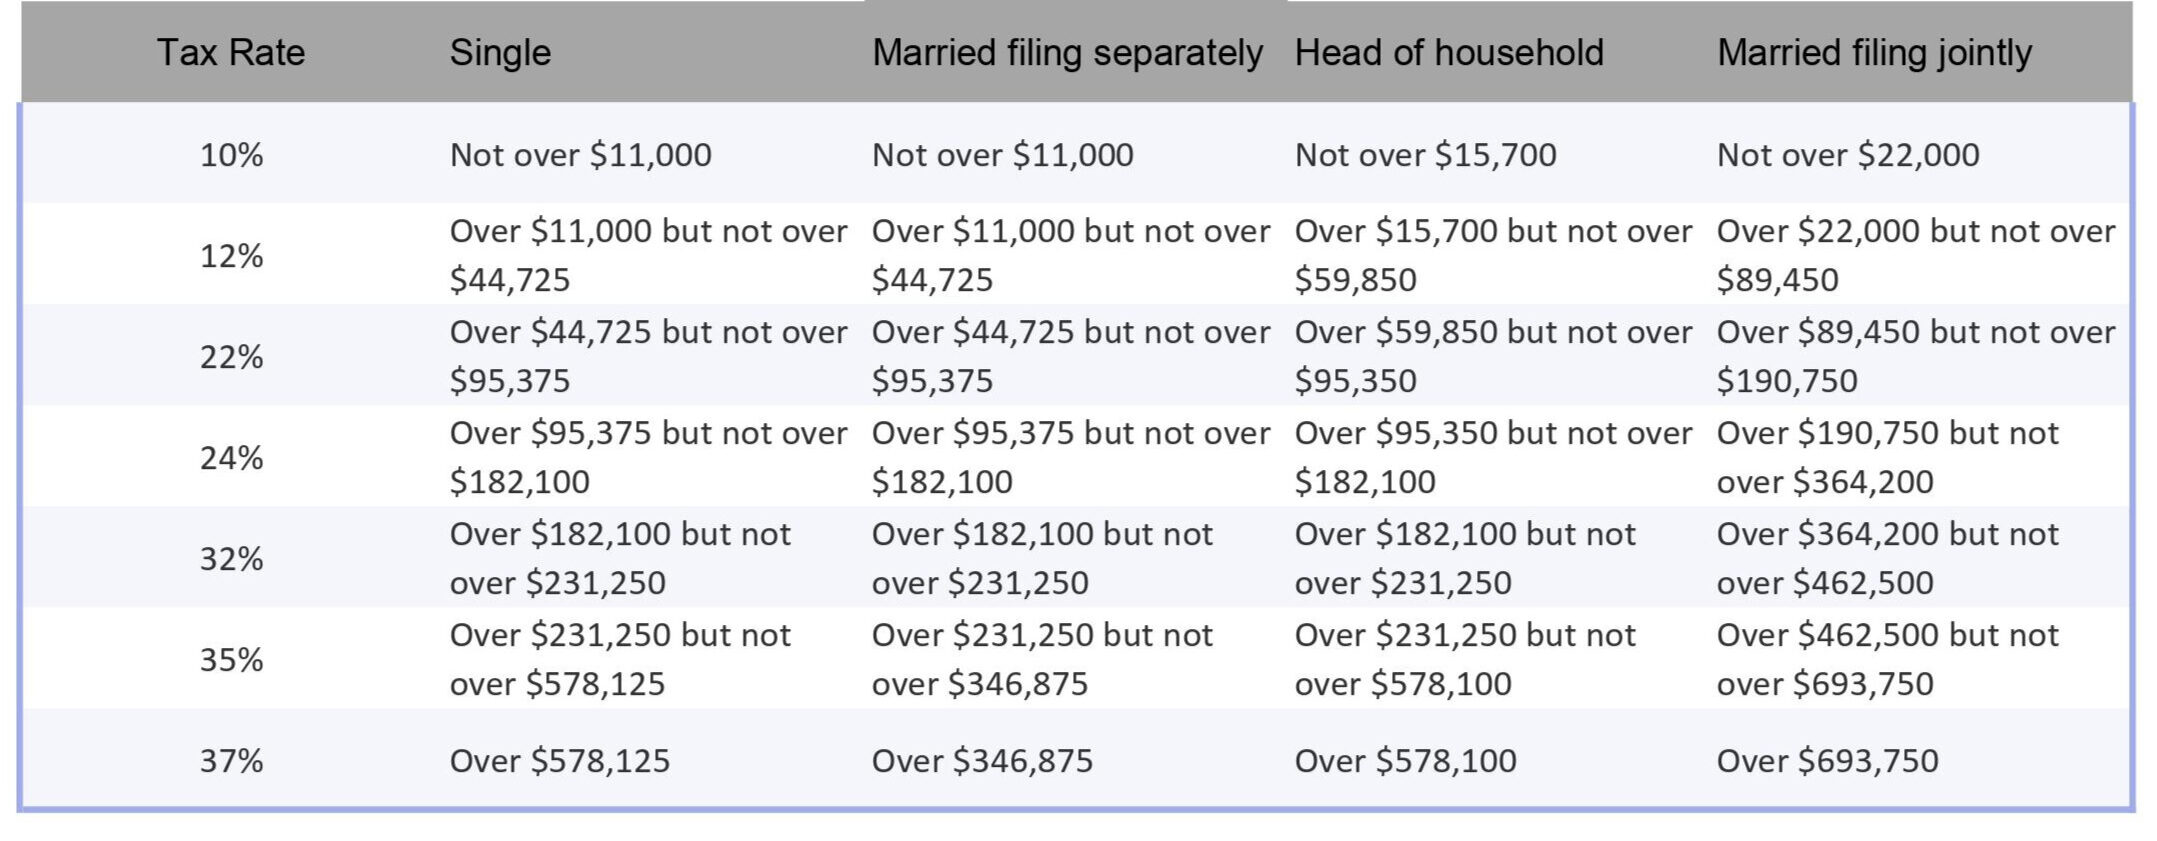 Spreadsheet showing the 2023 tax rates based on income for individuals filling as single, married filing separaely, head of household, and married filing jointly.